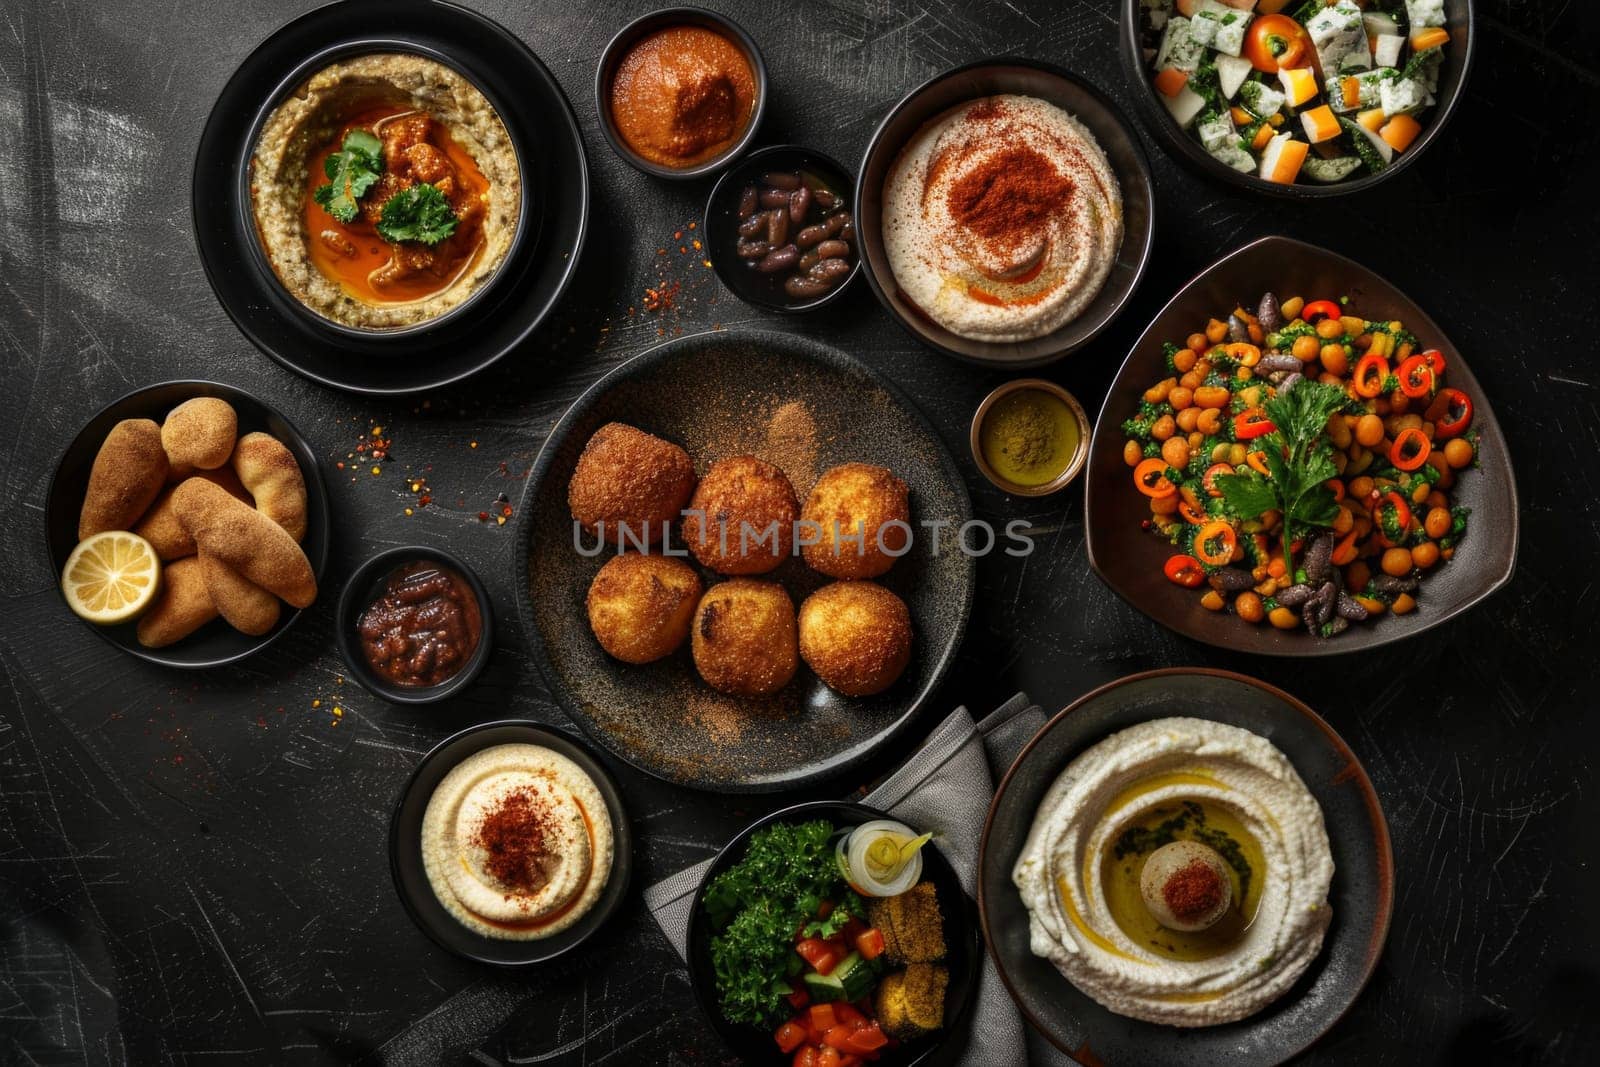 Top view of arabic food with a variety of dishes including hummus and falafel. Horizontal by papatonic